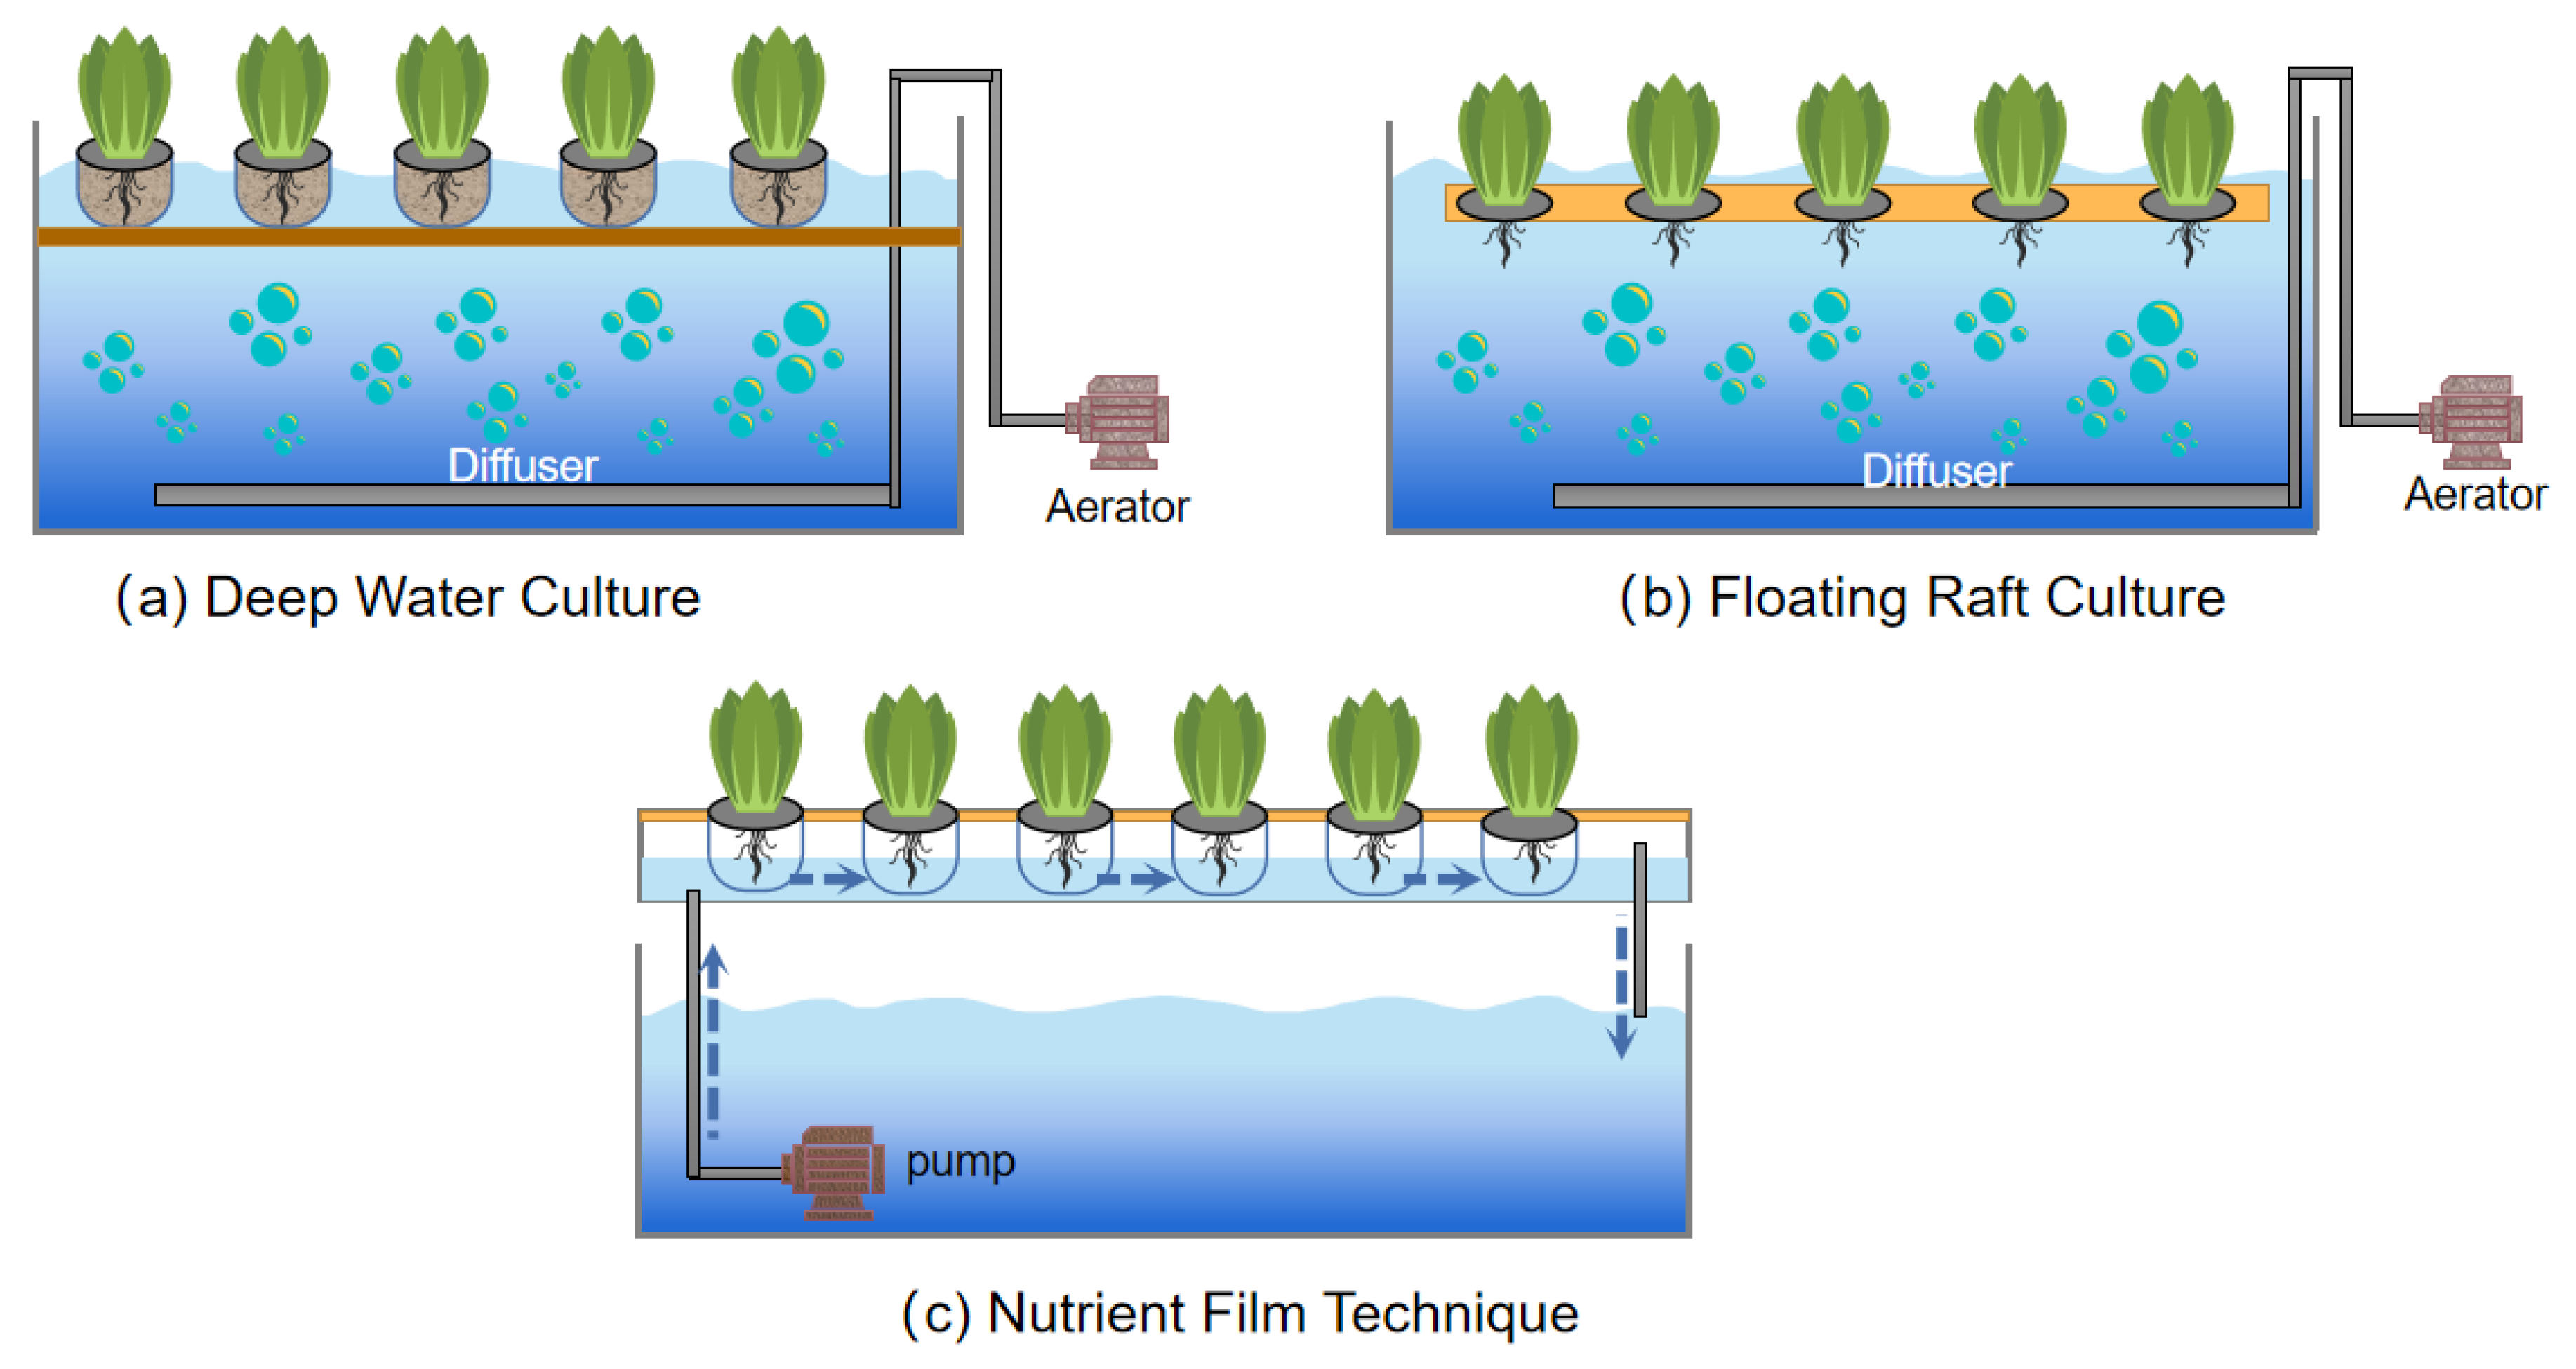 Economic feasibility of adopting a hydroponics system on substrate